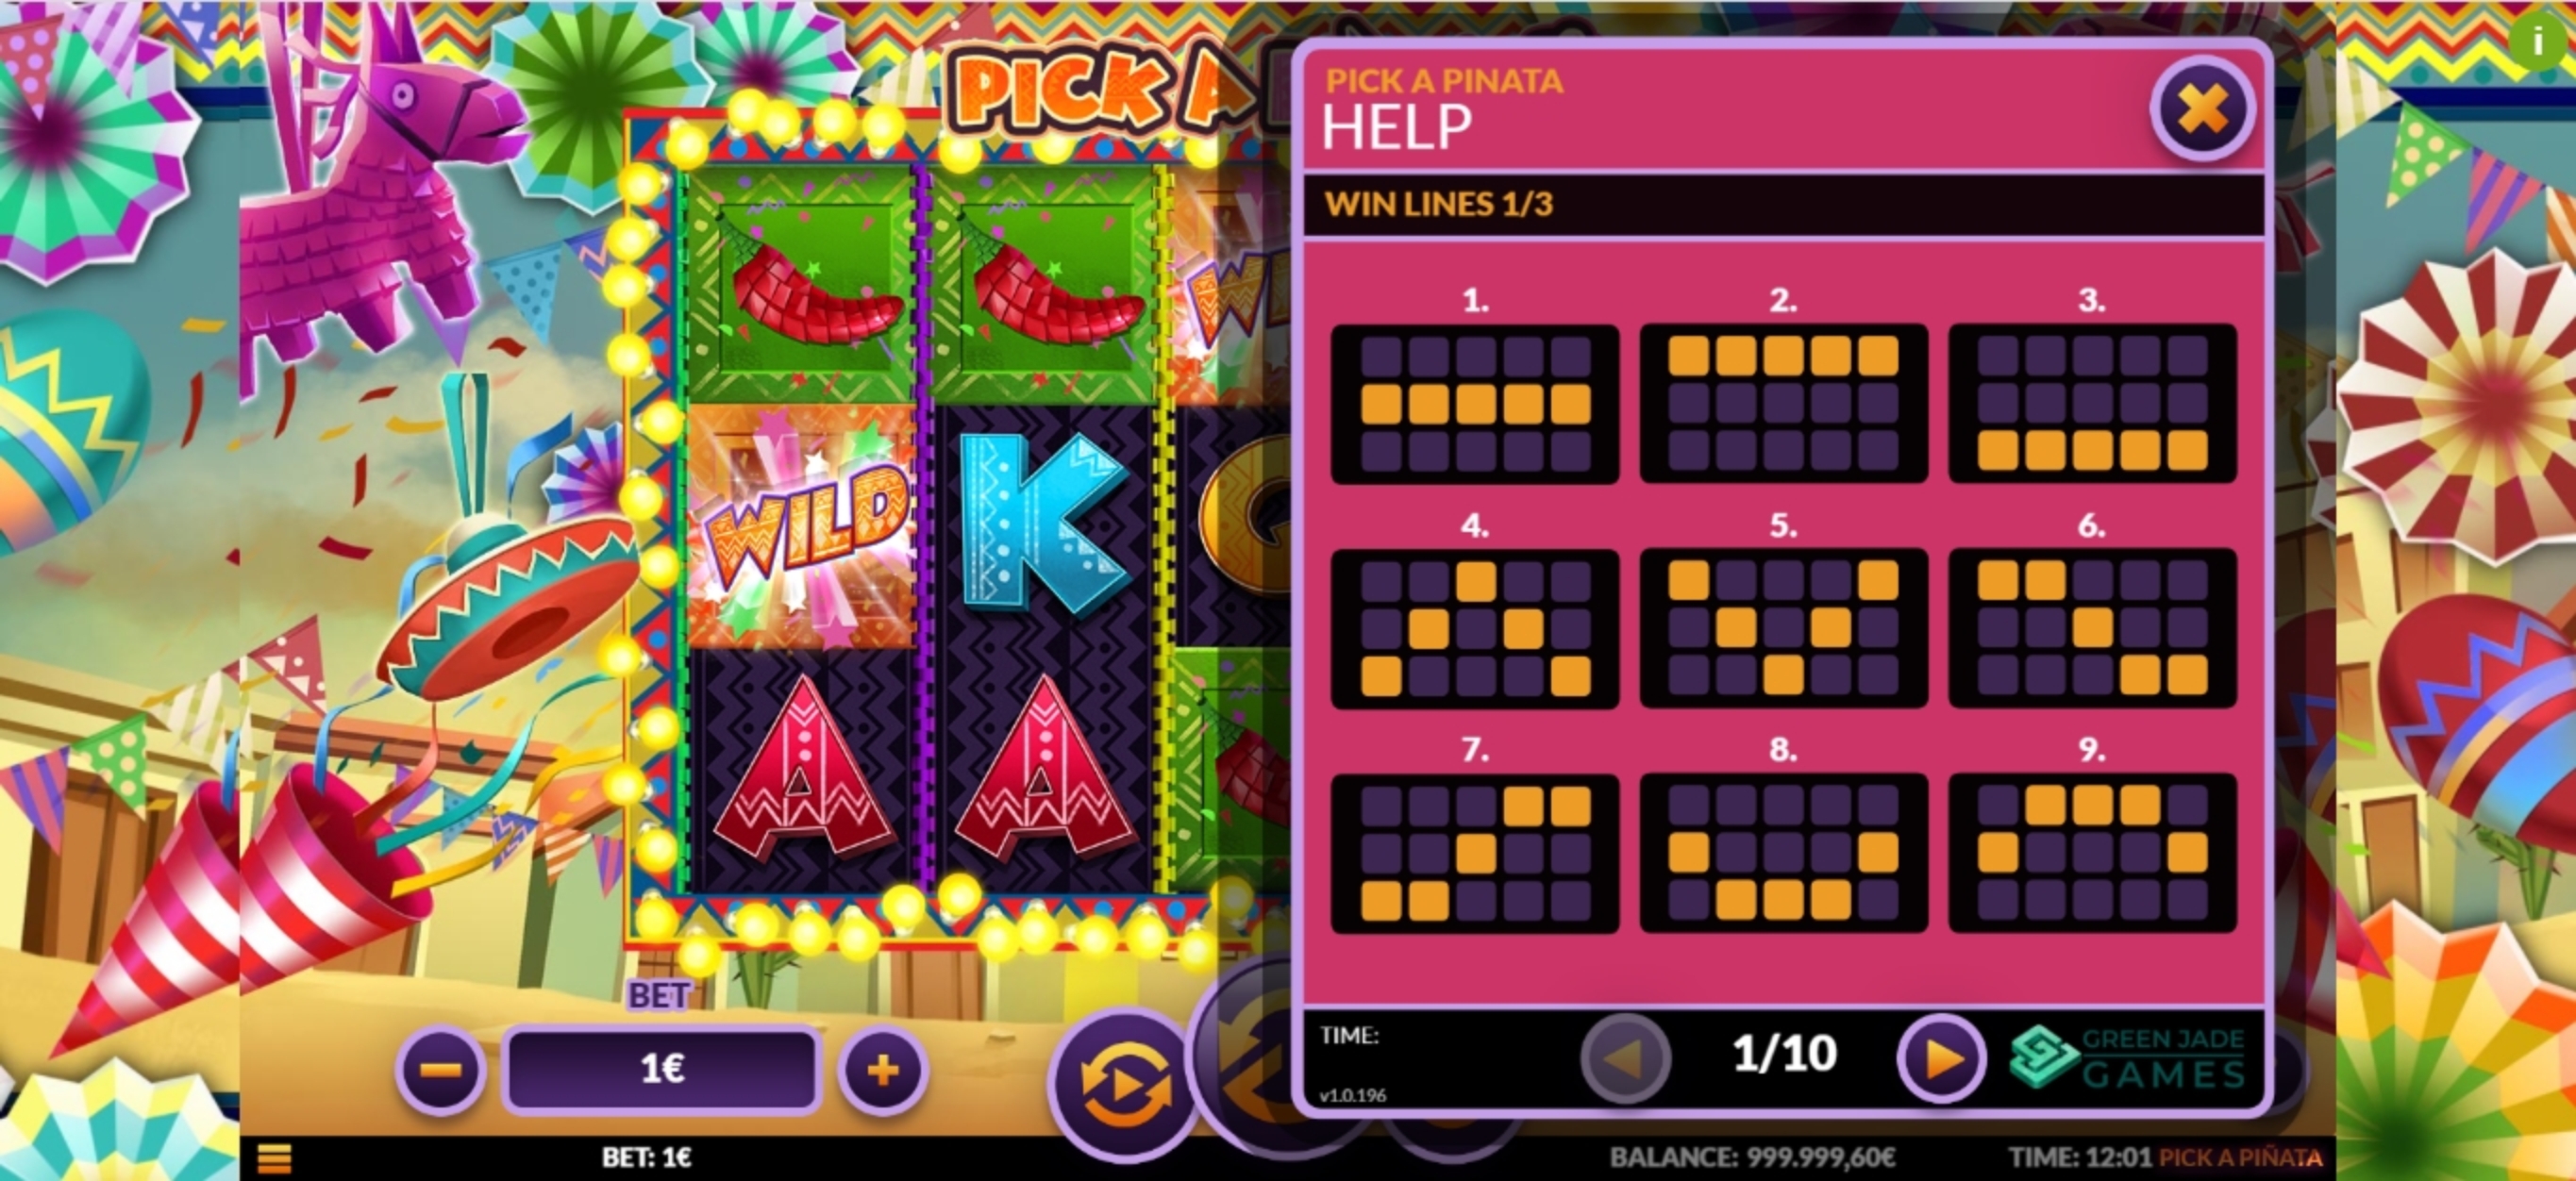 Info of Pick a Pinata Slot Game by Green Jade Games